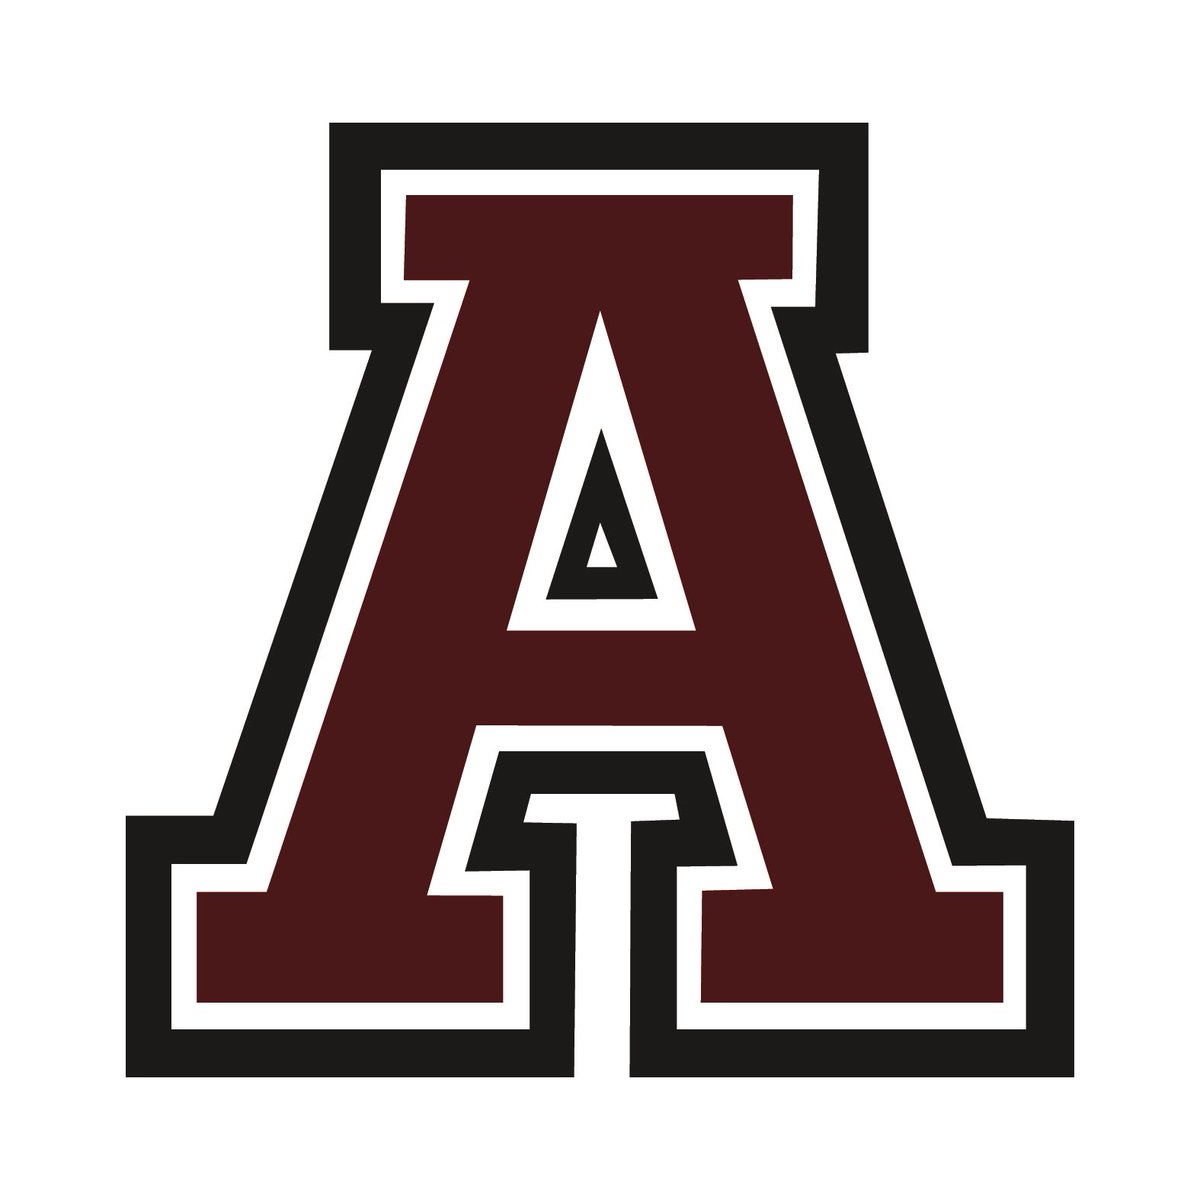 Thanks to Coach Riley and Coach Selvera for having me out at @AustinMaroonFB